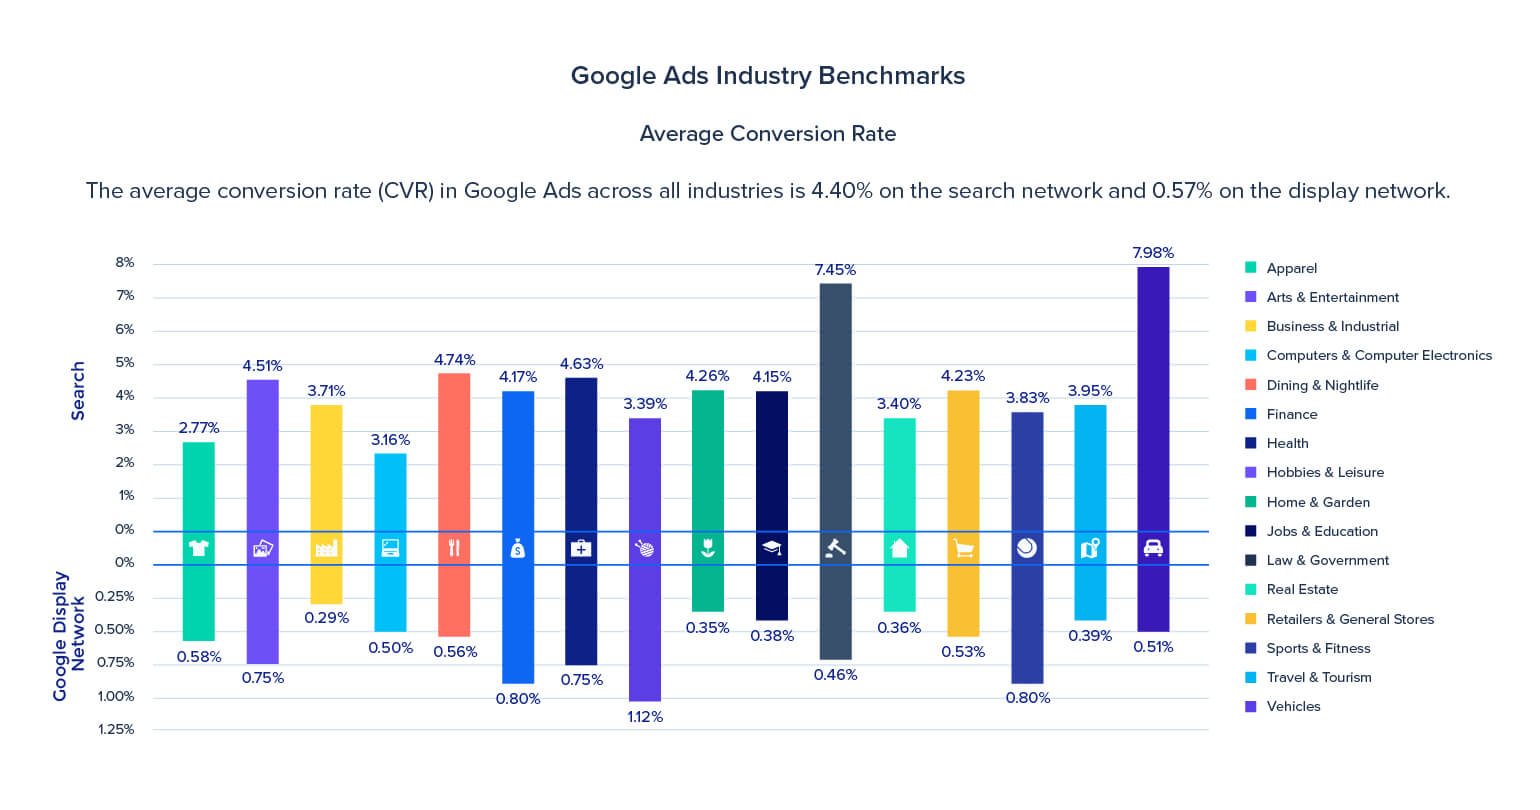 Average conversion rate for Google Ads